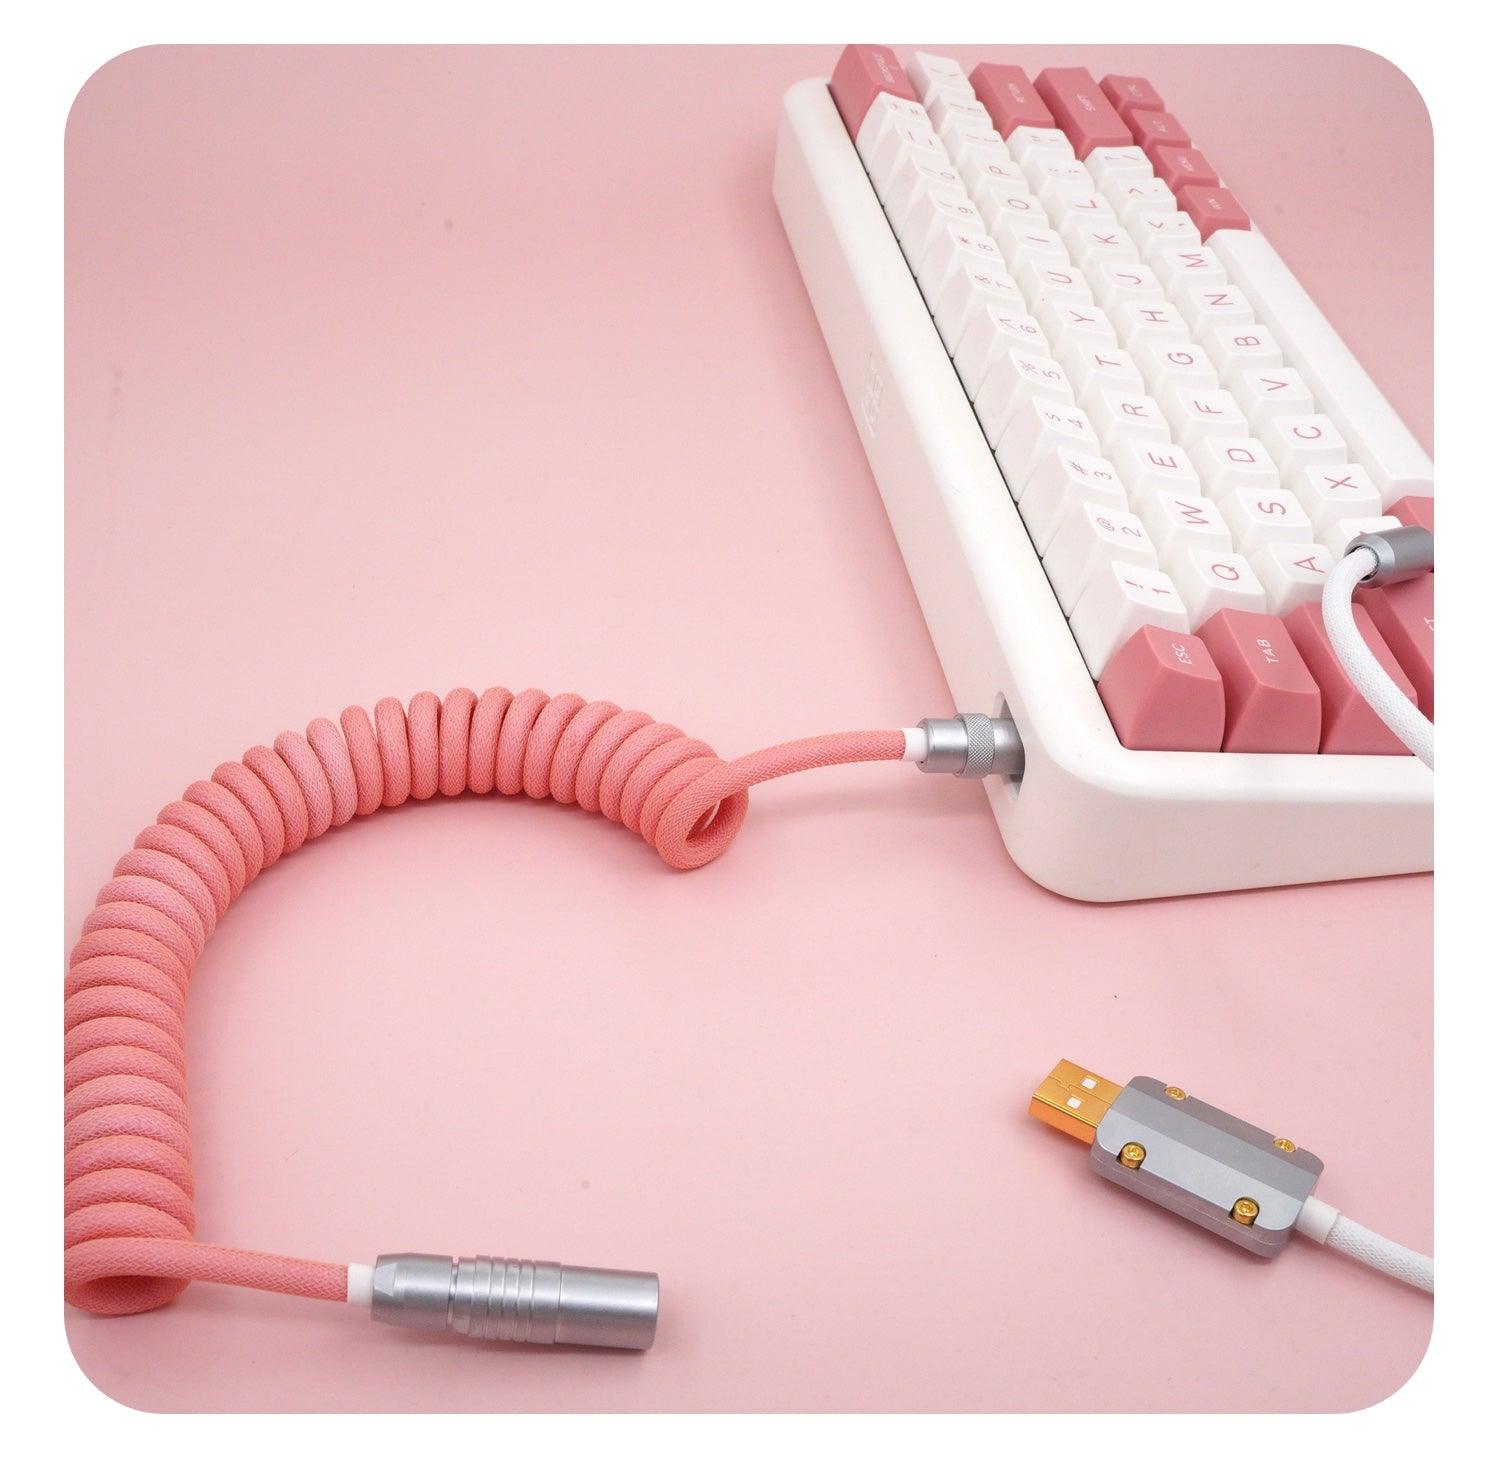 GeekCable Pink White Hand-made Customized Keyboard Data Spiral Cable - IPOPULARSHOP